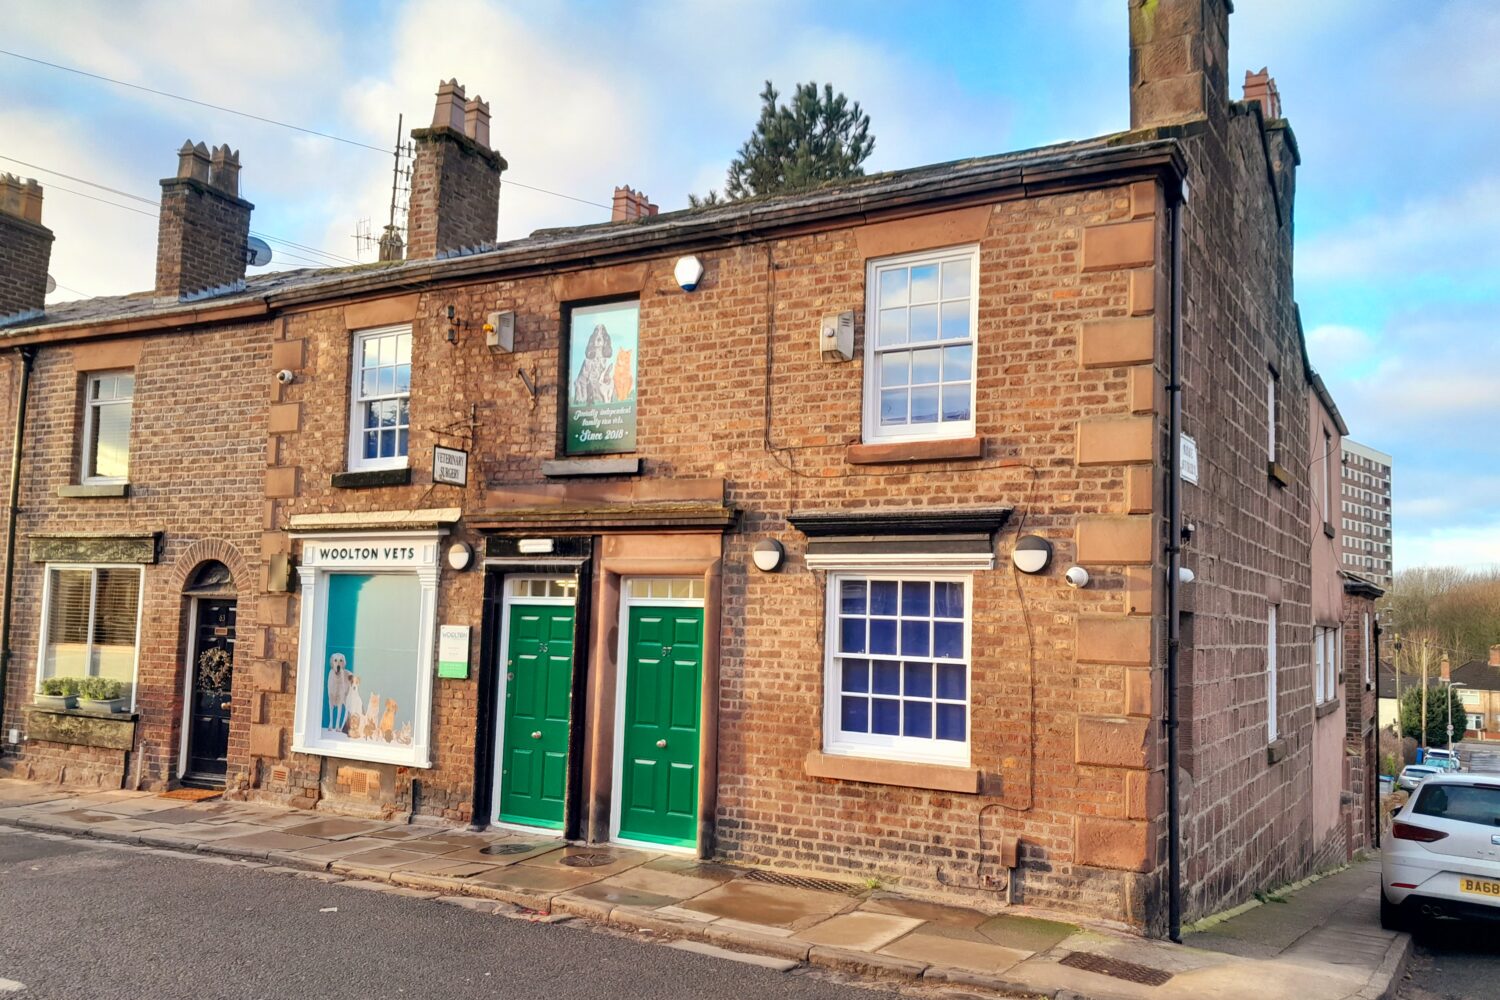 Woolton Veterinary Centre – South Liverpool